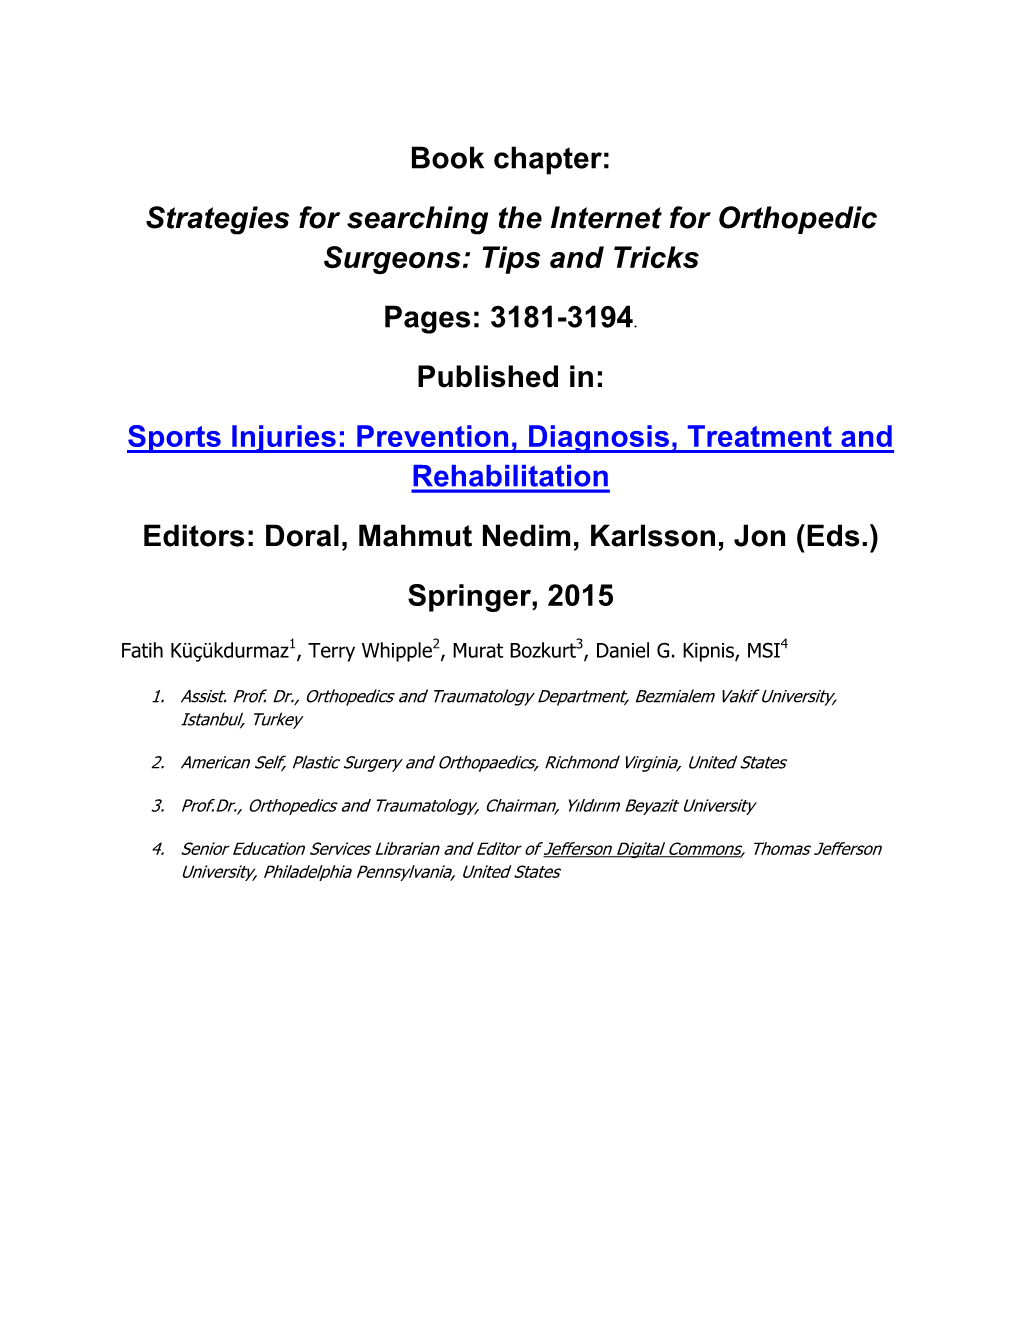 Book Chapter: Strategies for Searching the Internet for Orthopedic Surgeons: Tips and Tricks